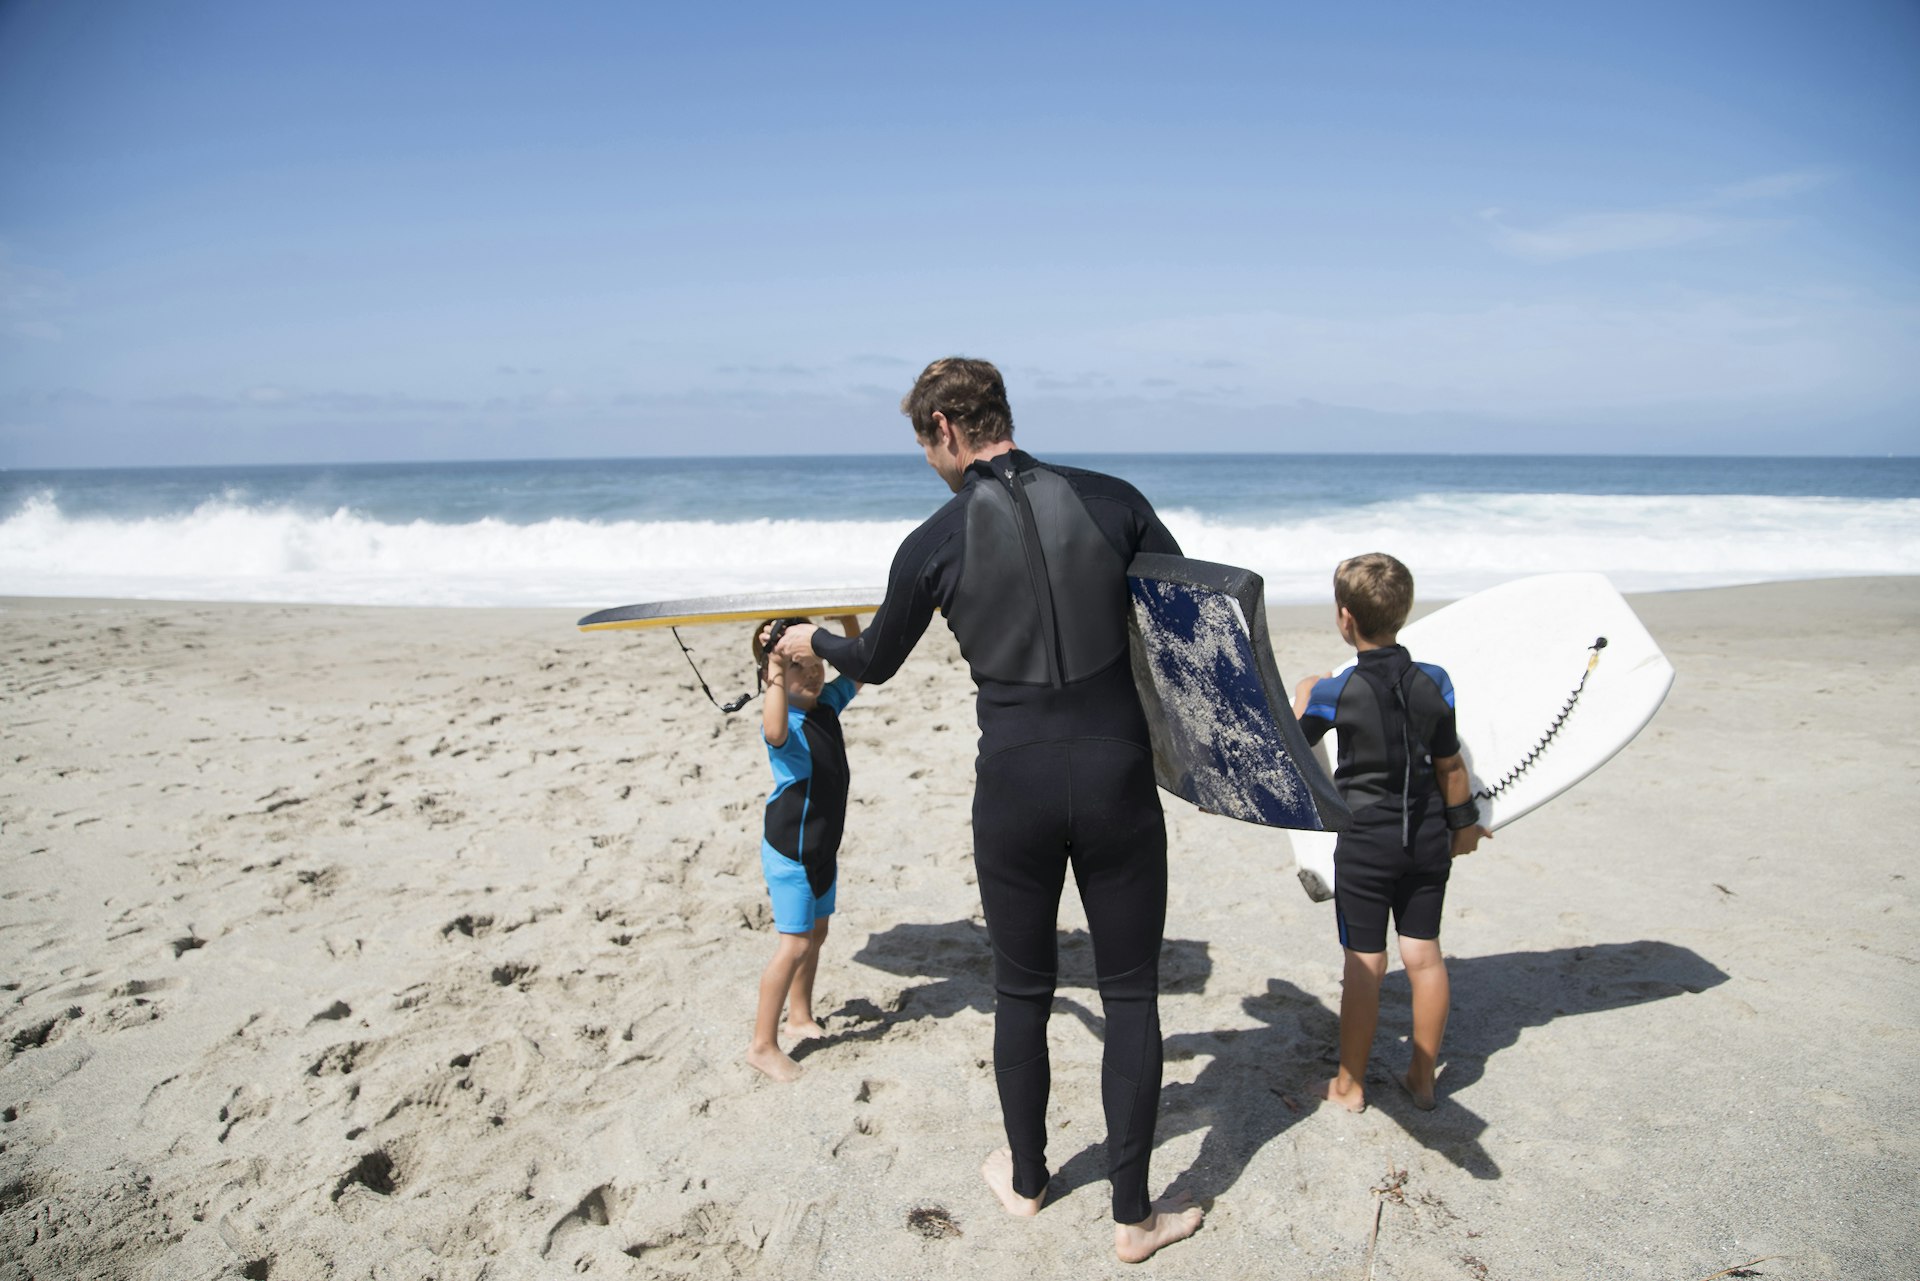 Features - Rear view of father and two sons preparing to go bodyboarding on beach, Laguna Beach, California, USA